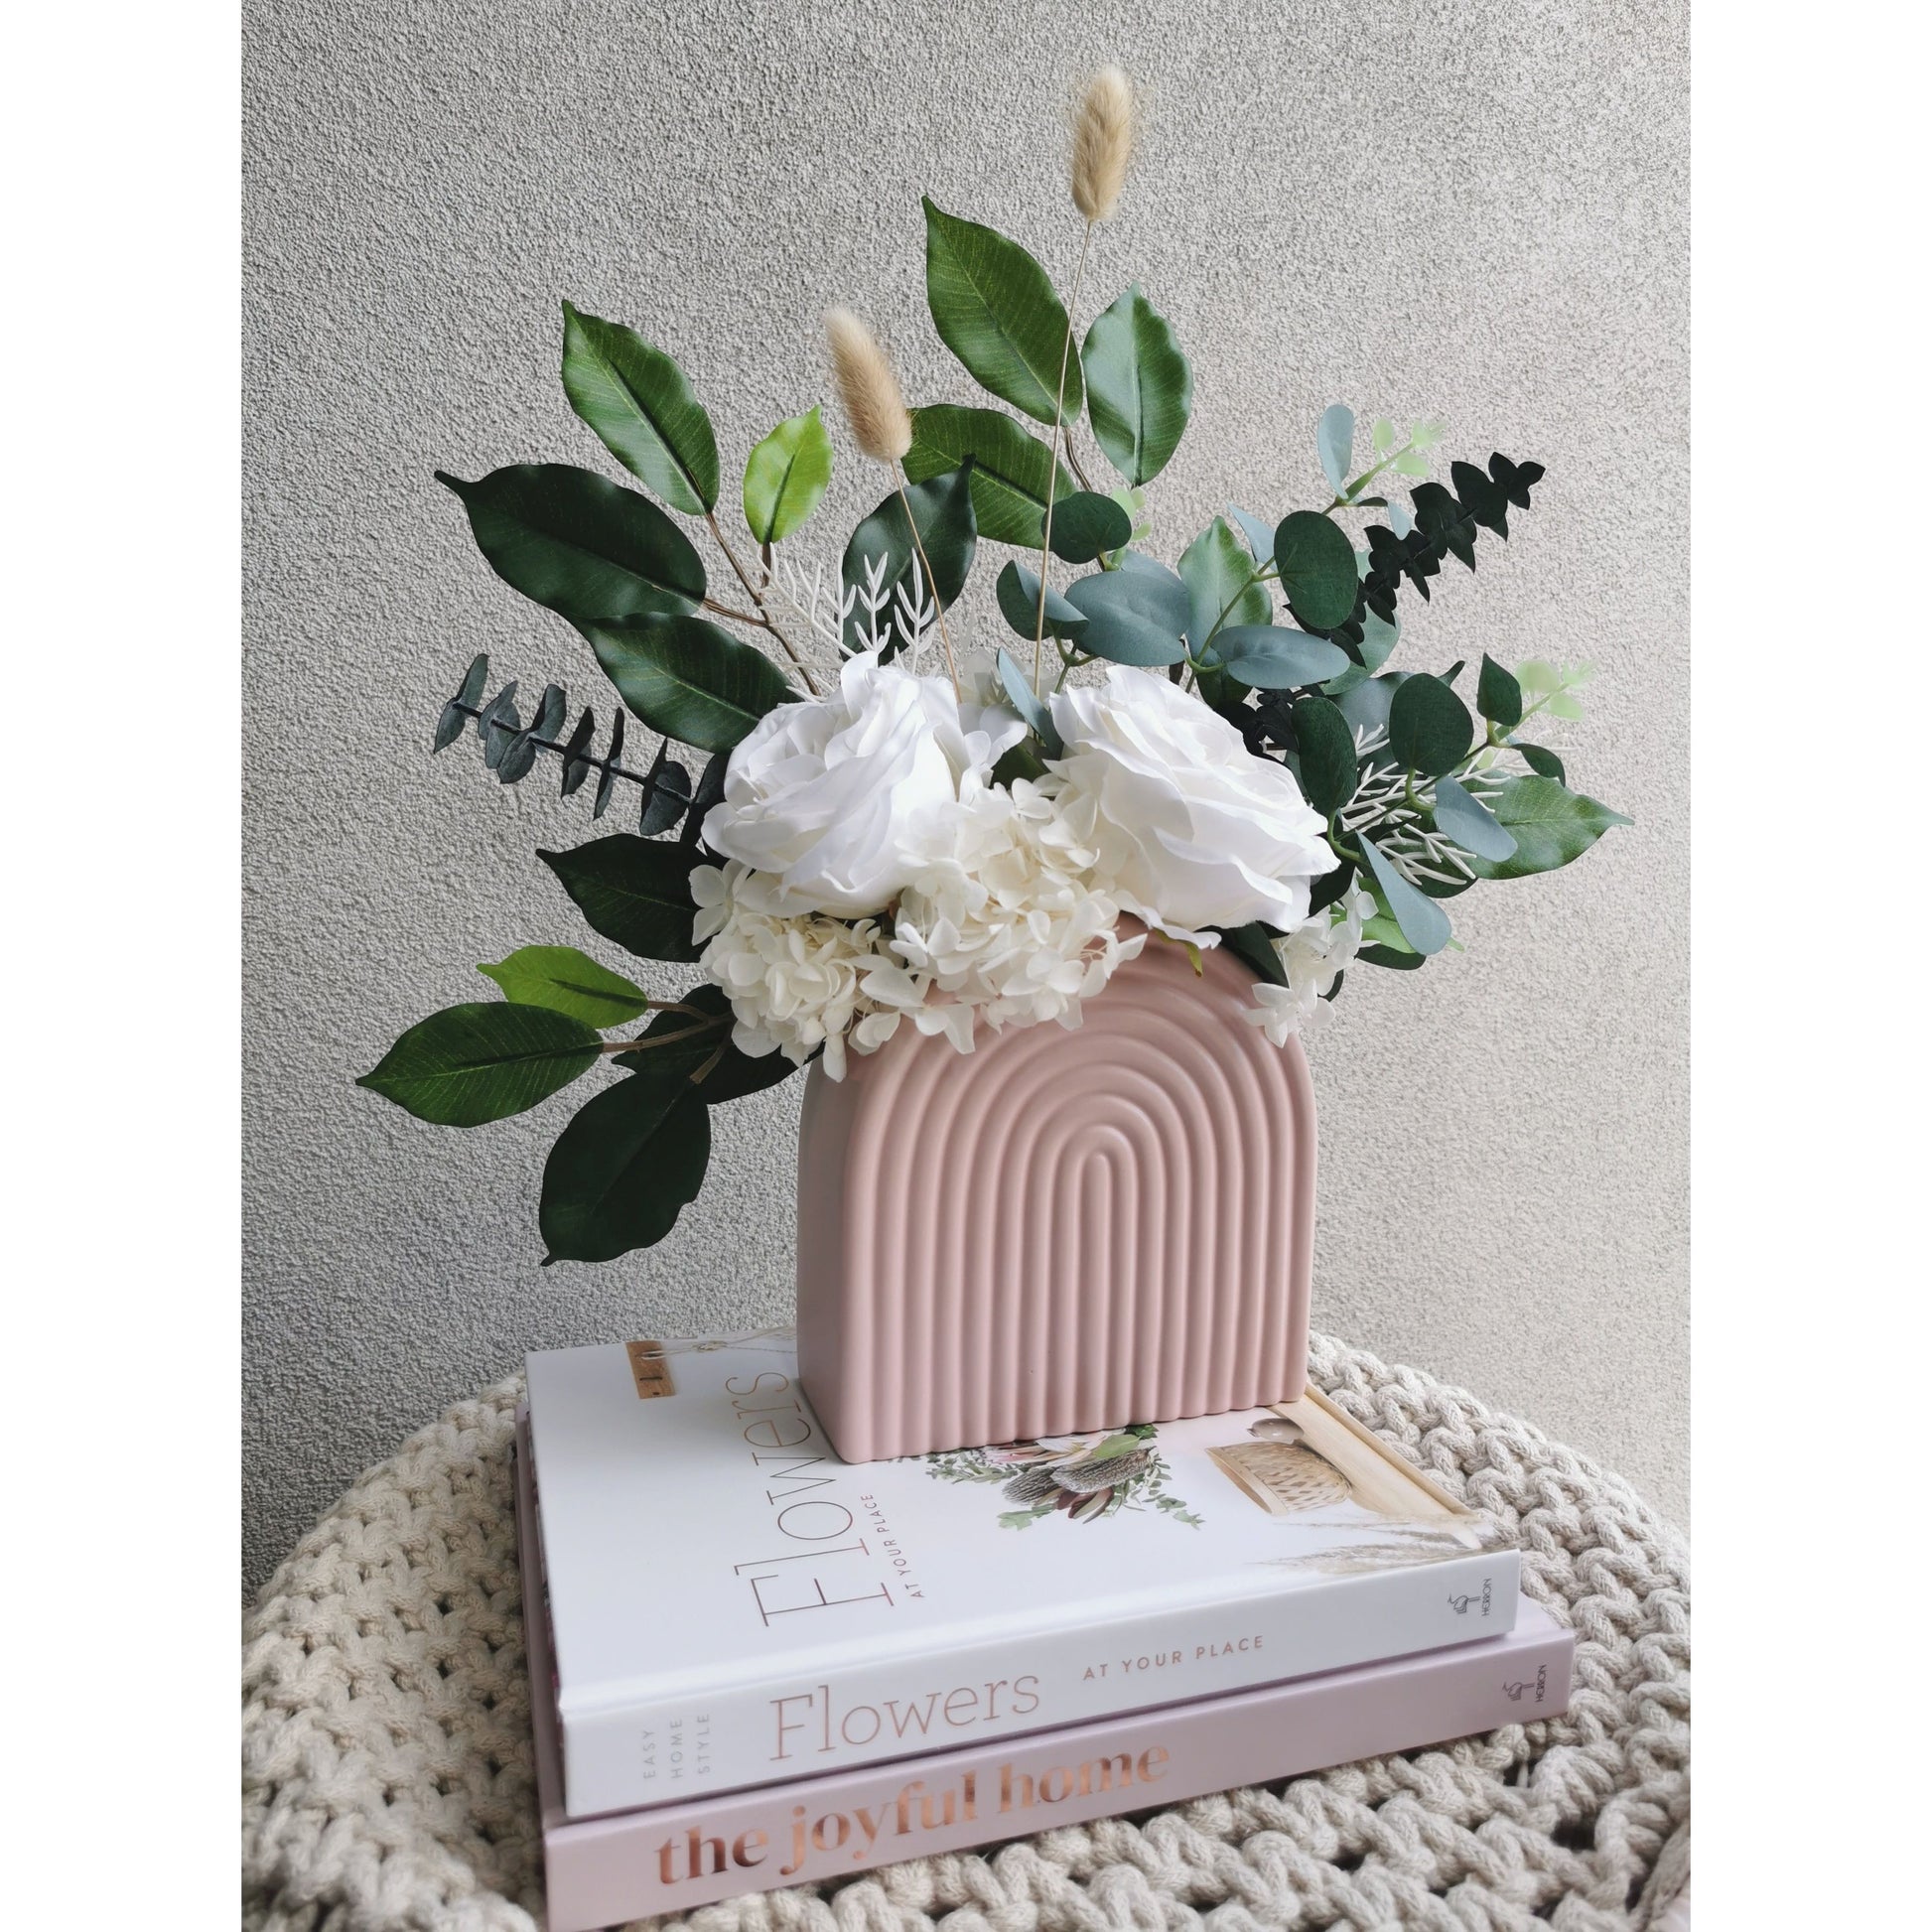 Green & white flowers consisting of dried, preserved and artificial flowers and set in to a pink arch vase. Picture shows the flower arrangement sitting on design books on a table against a blank wall and sitting on an angle to the right